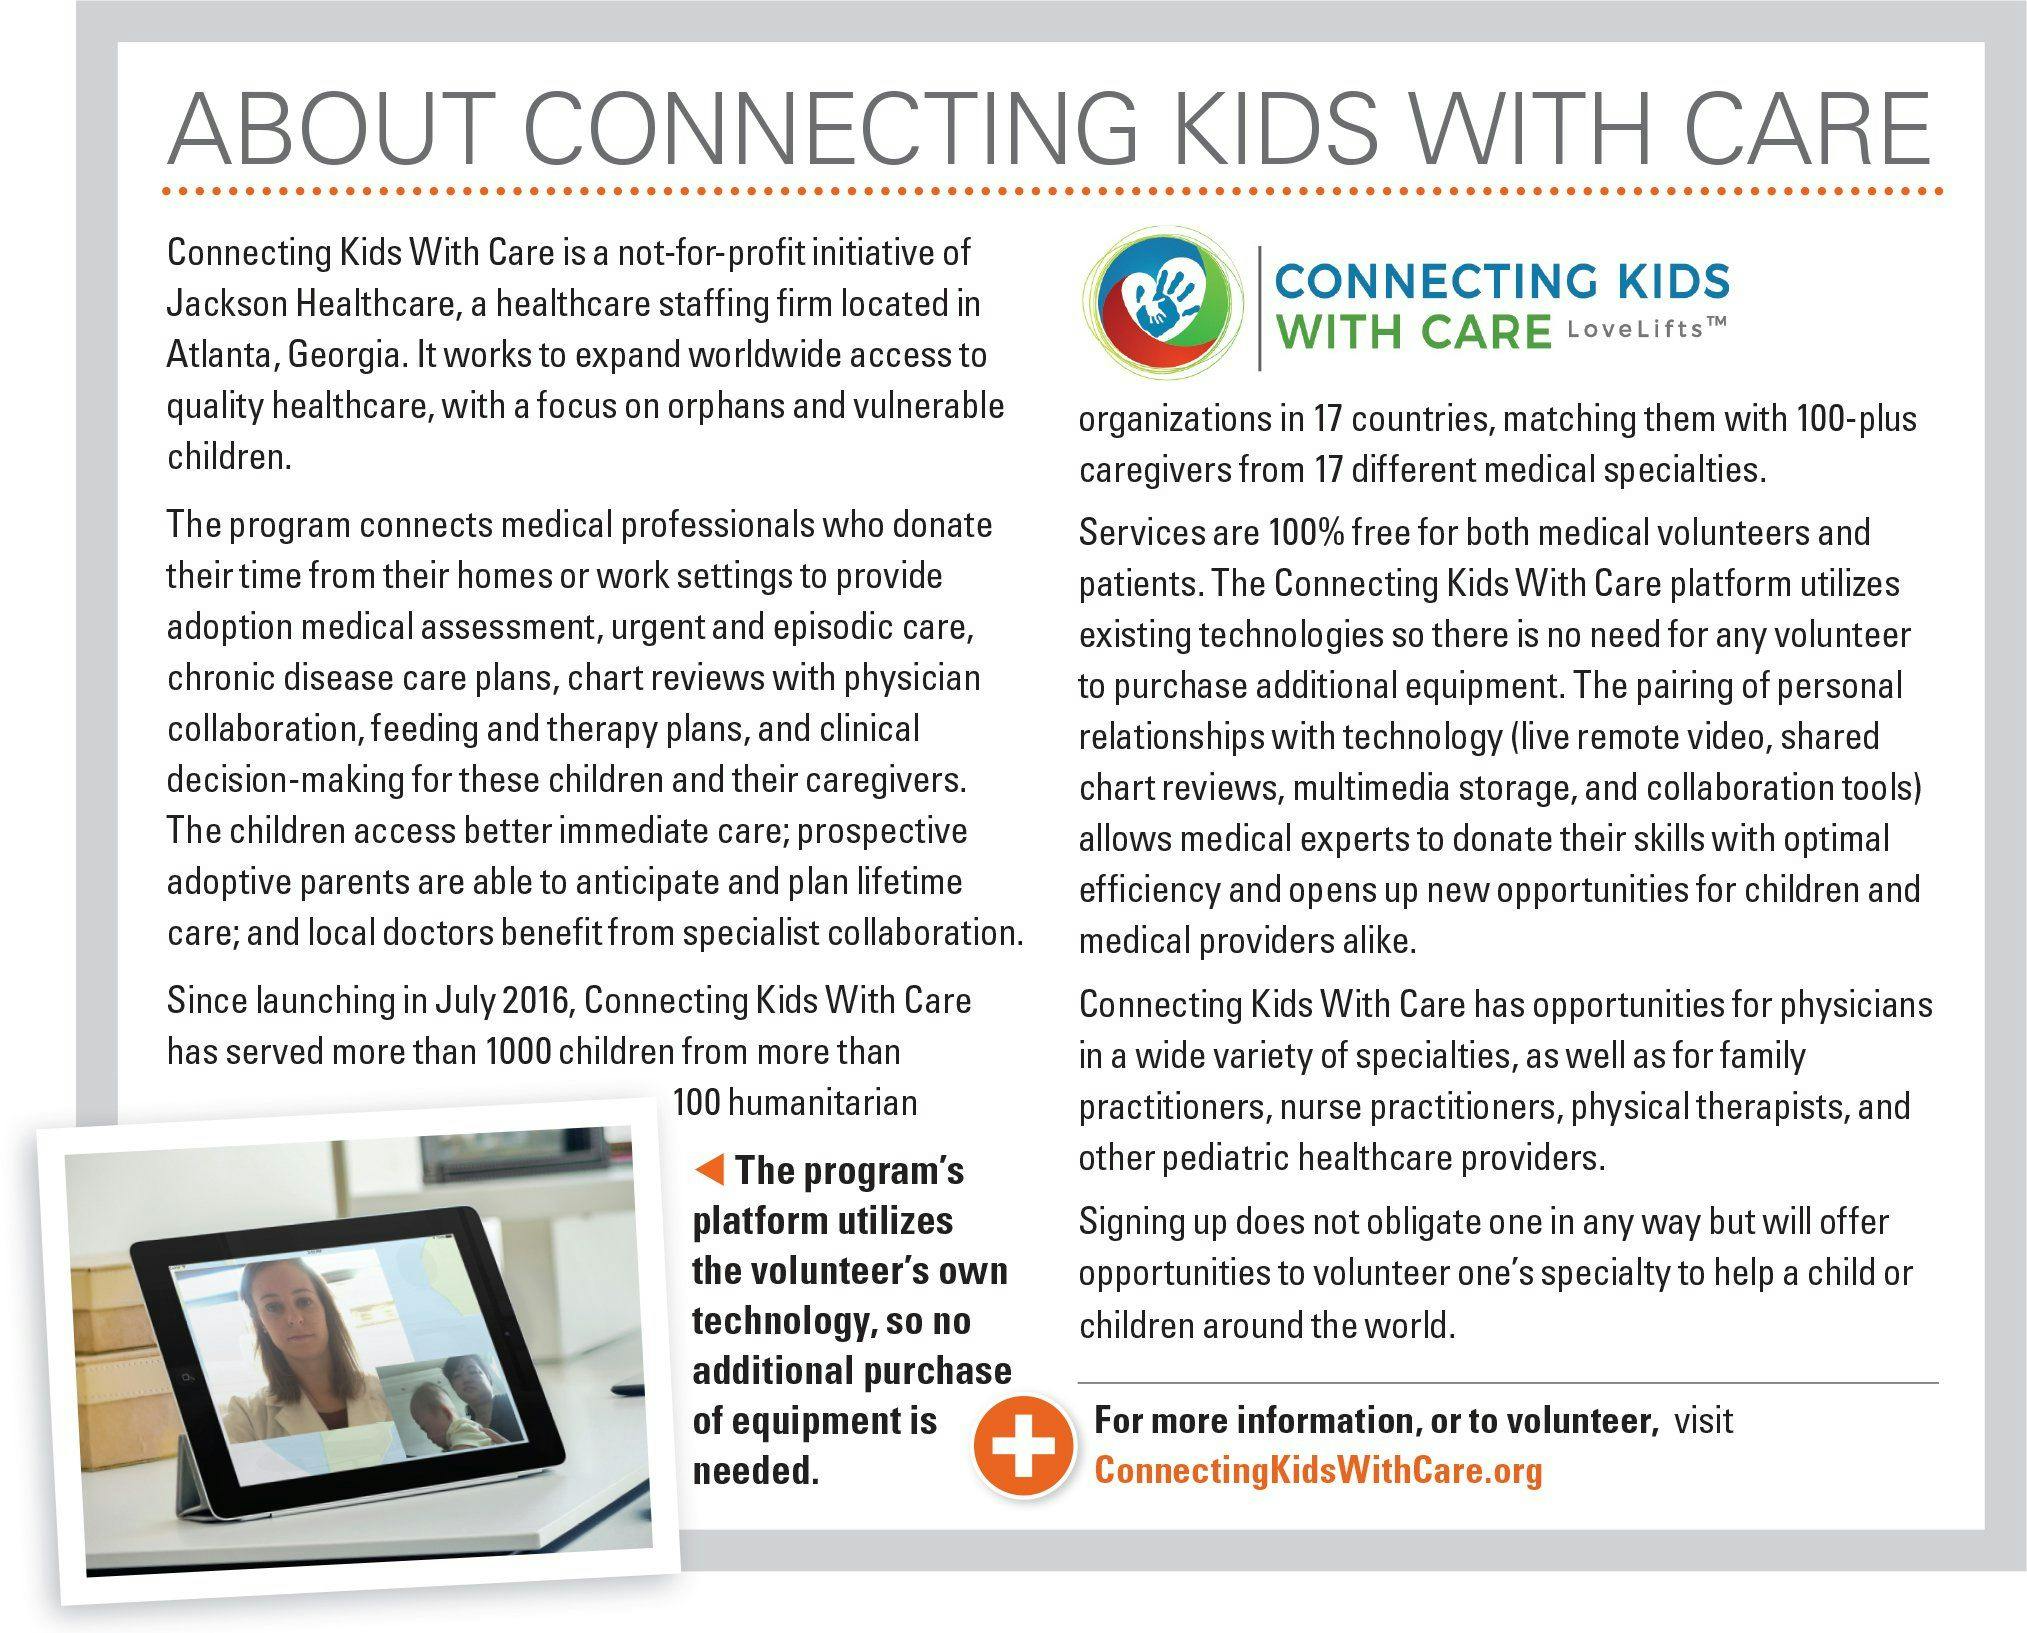 About Connecting Kids With Care